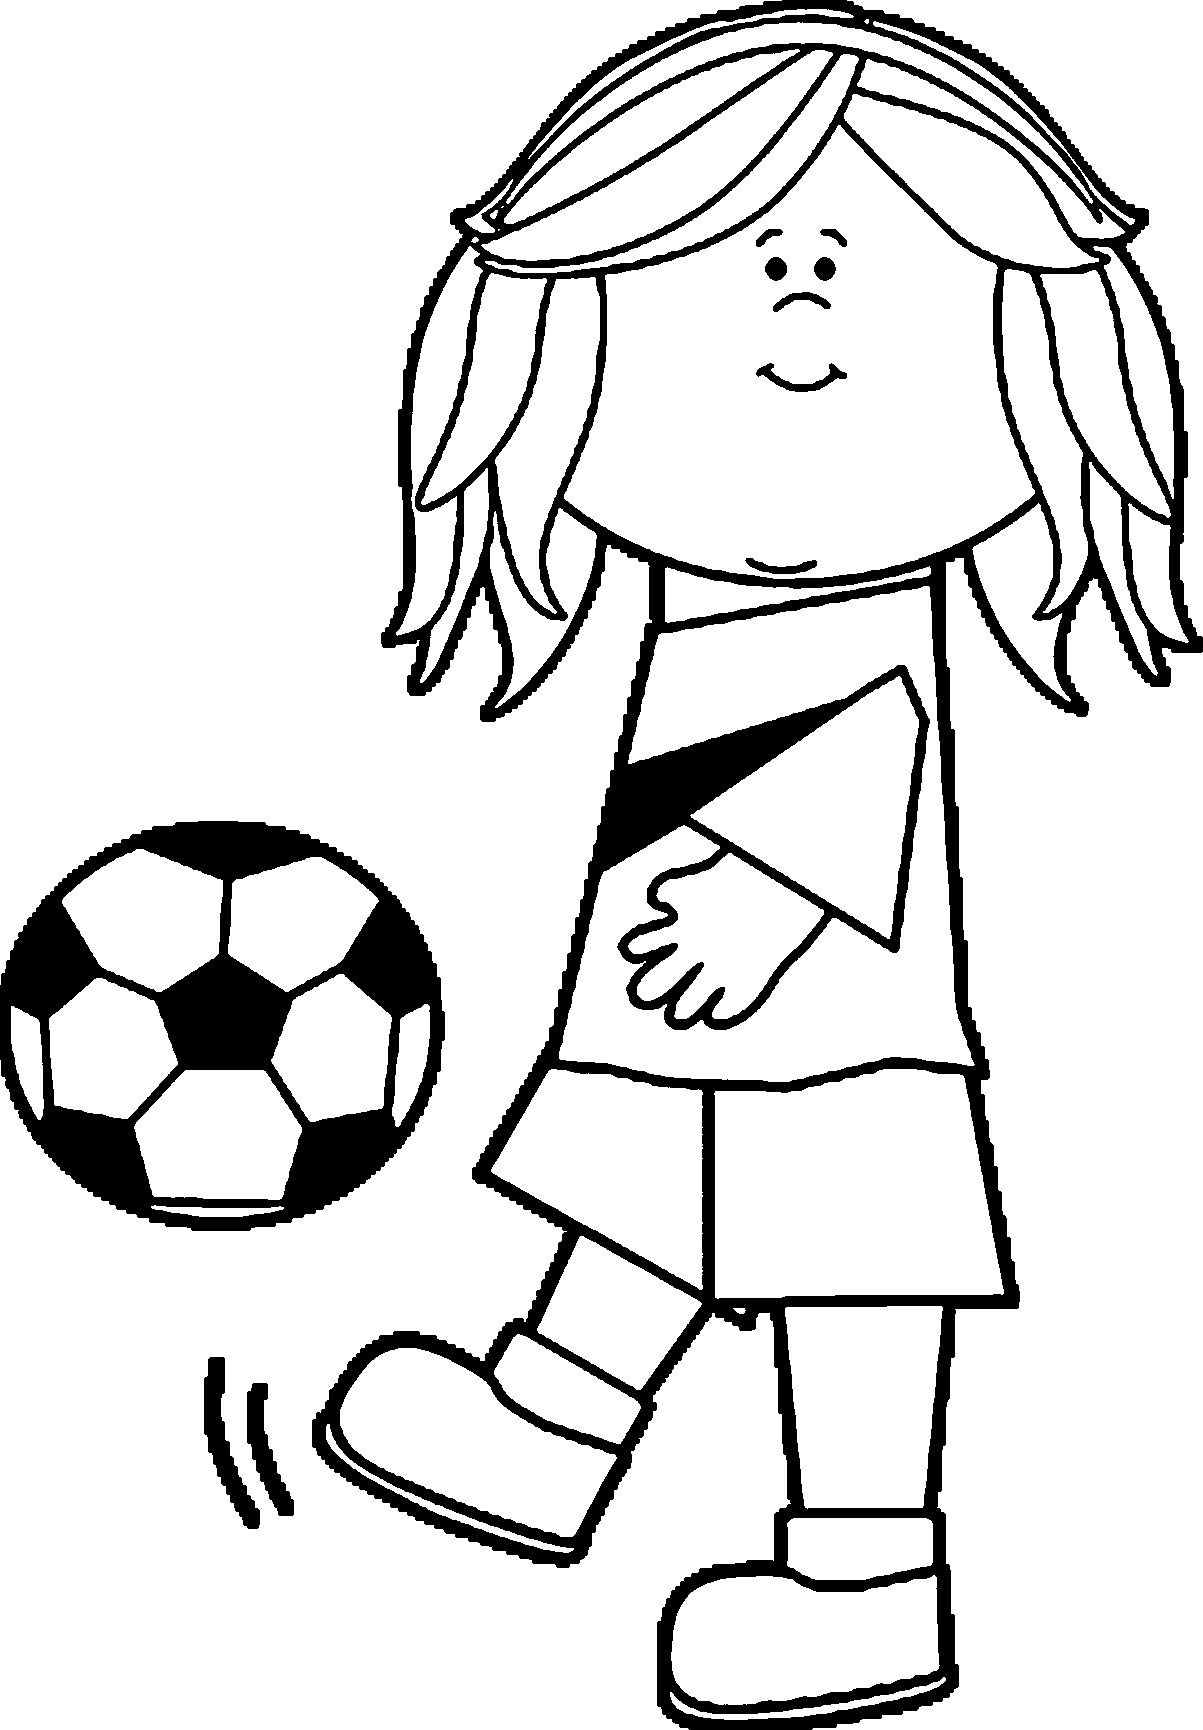 Soccer Girls Coloring Pages
 Soccer Girl Playing Football Coloring Page